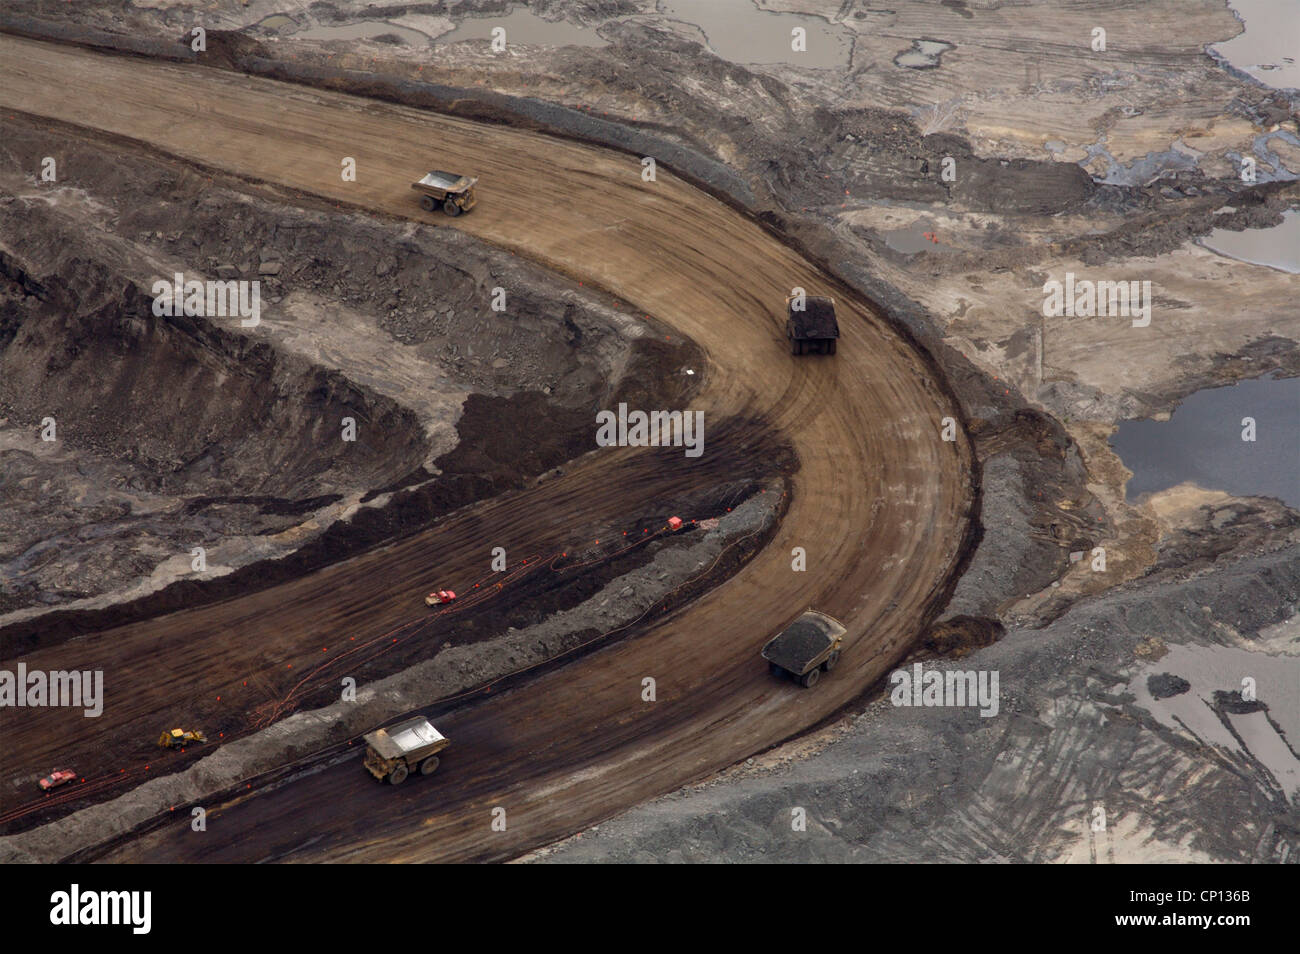 Tar sands mine, Alberta, Canada showing huge trucks used to carry the oil-rich sands. Aerial view Stock Photo